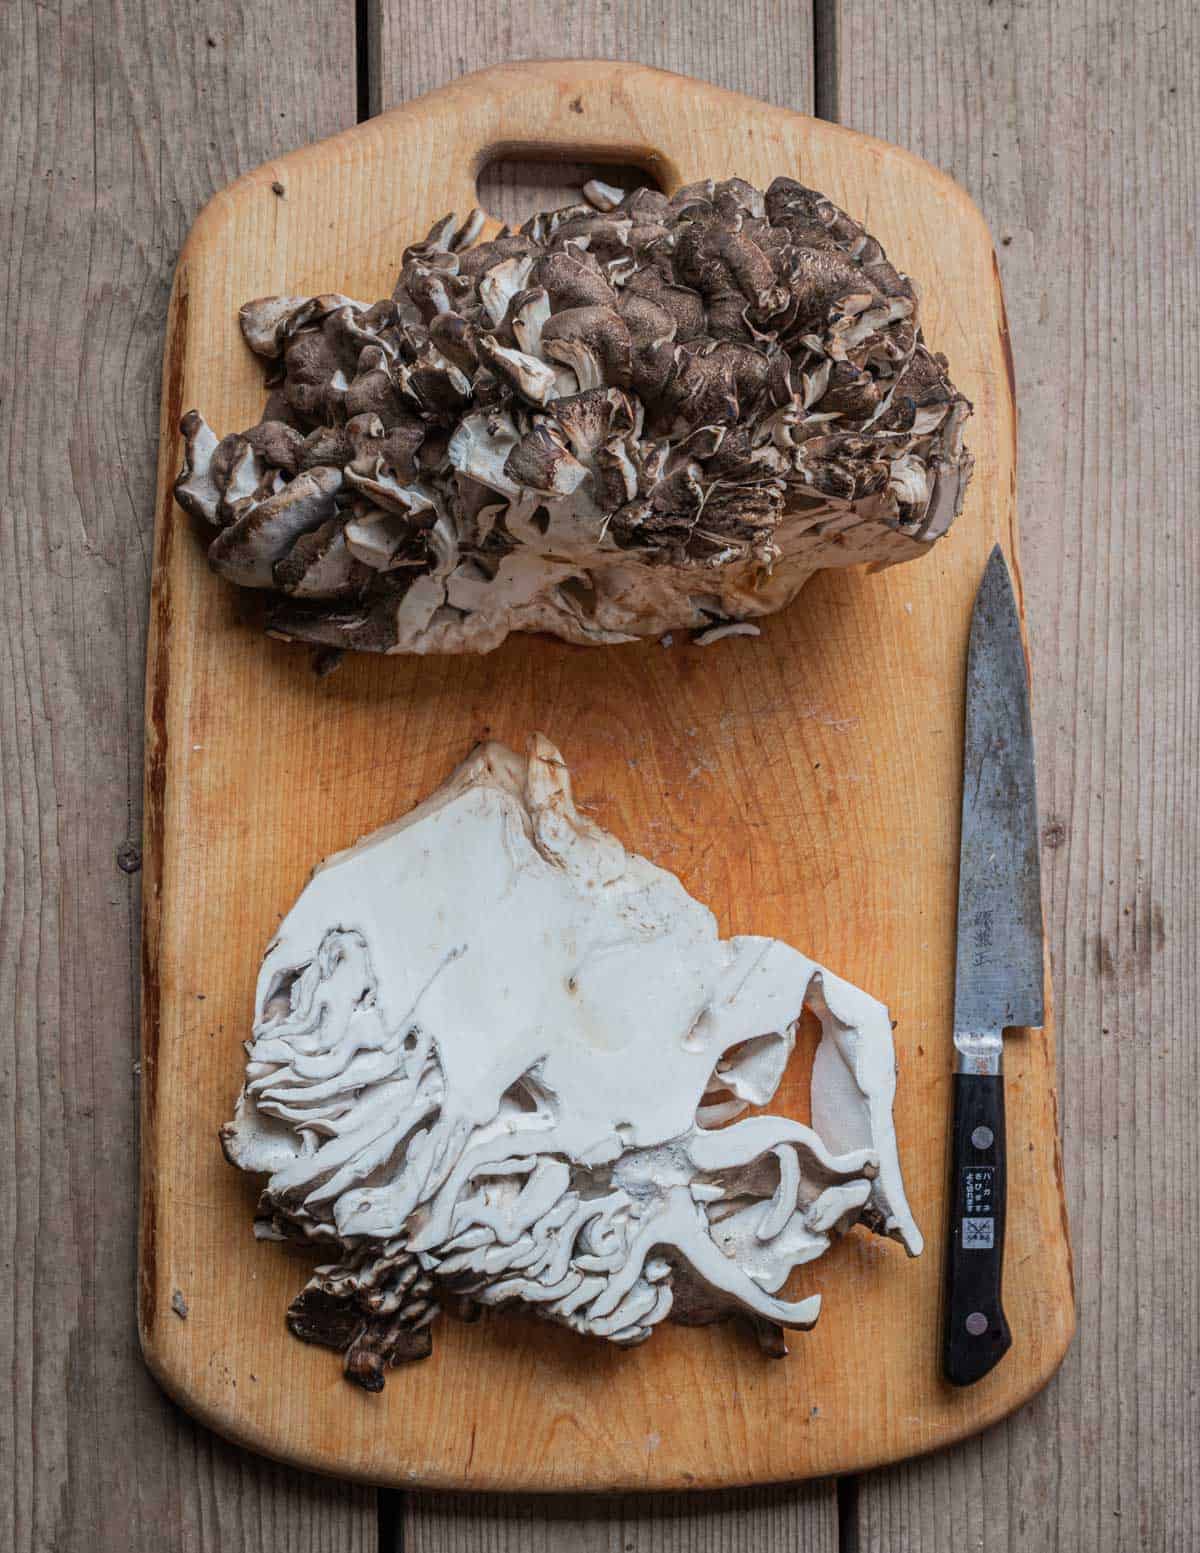 Cutting steaks from a hen of the woods mushroom, maitake, or Grifola frondosa